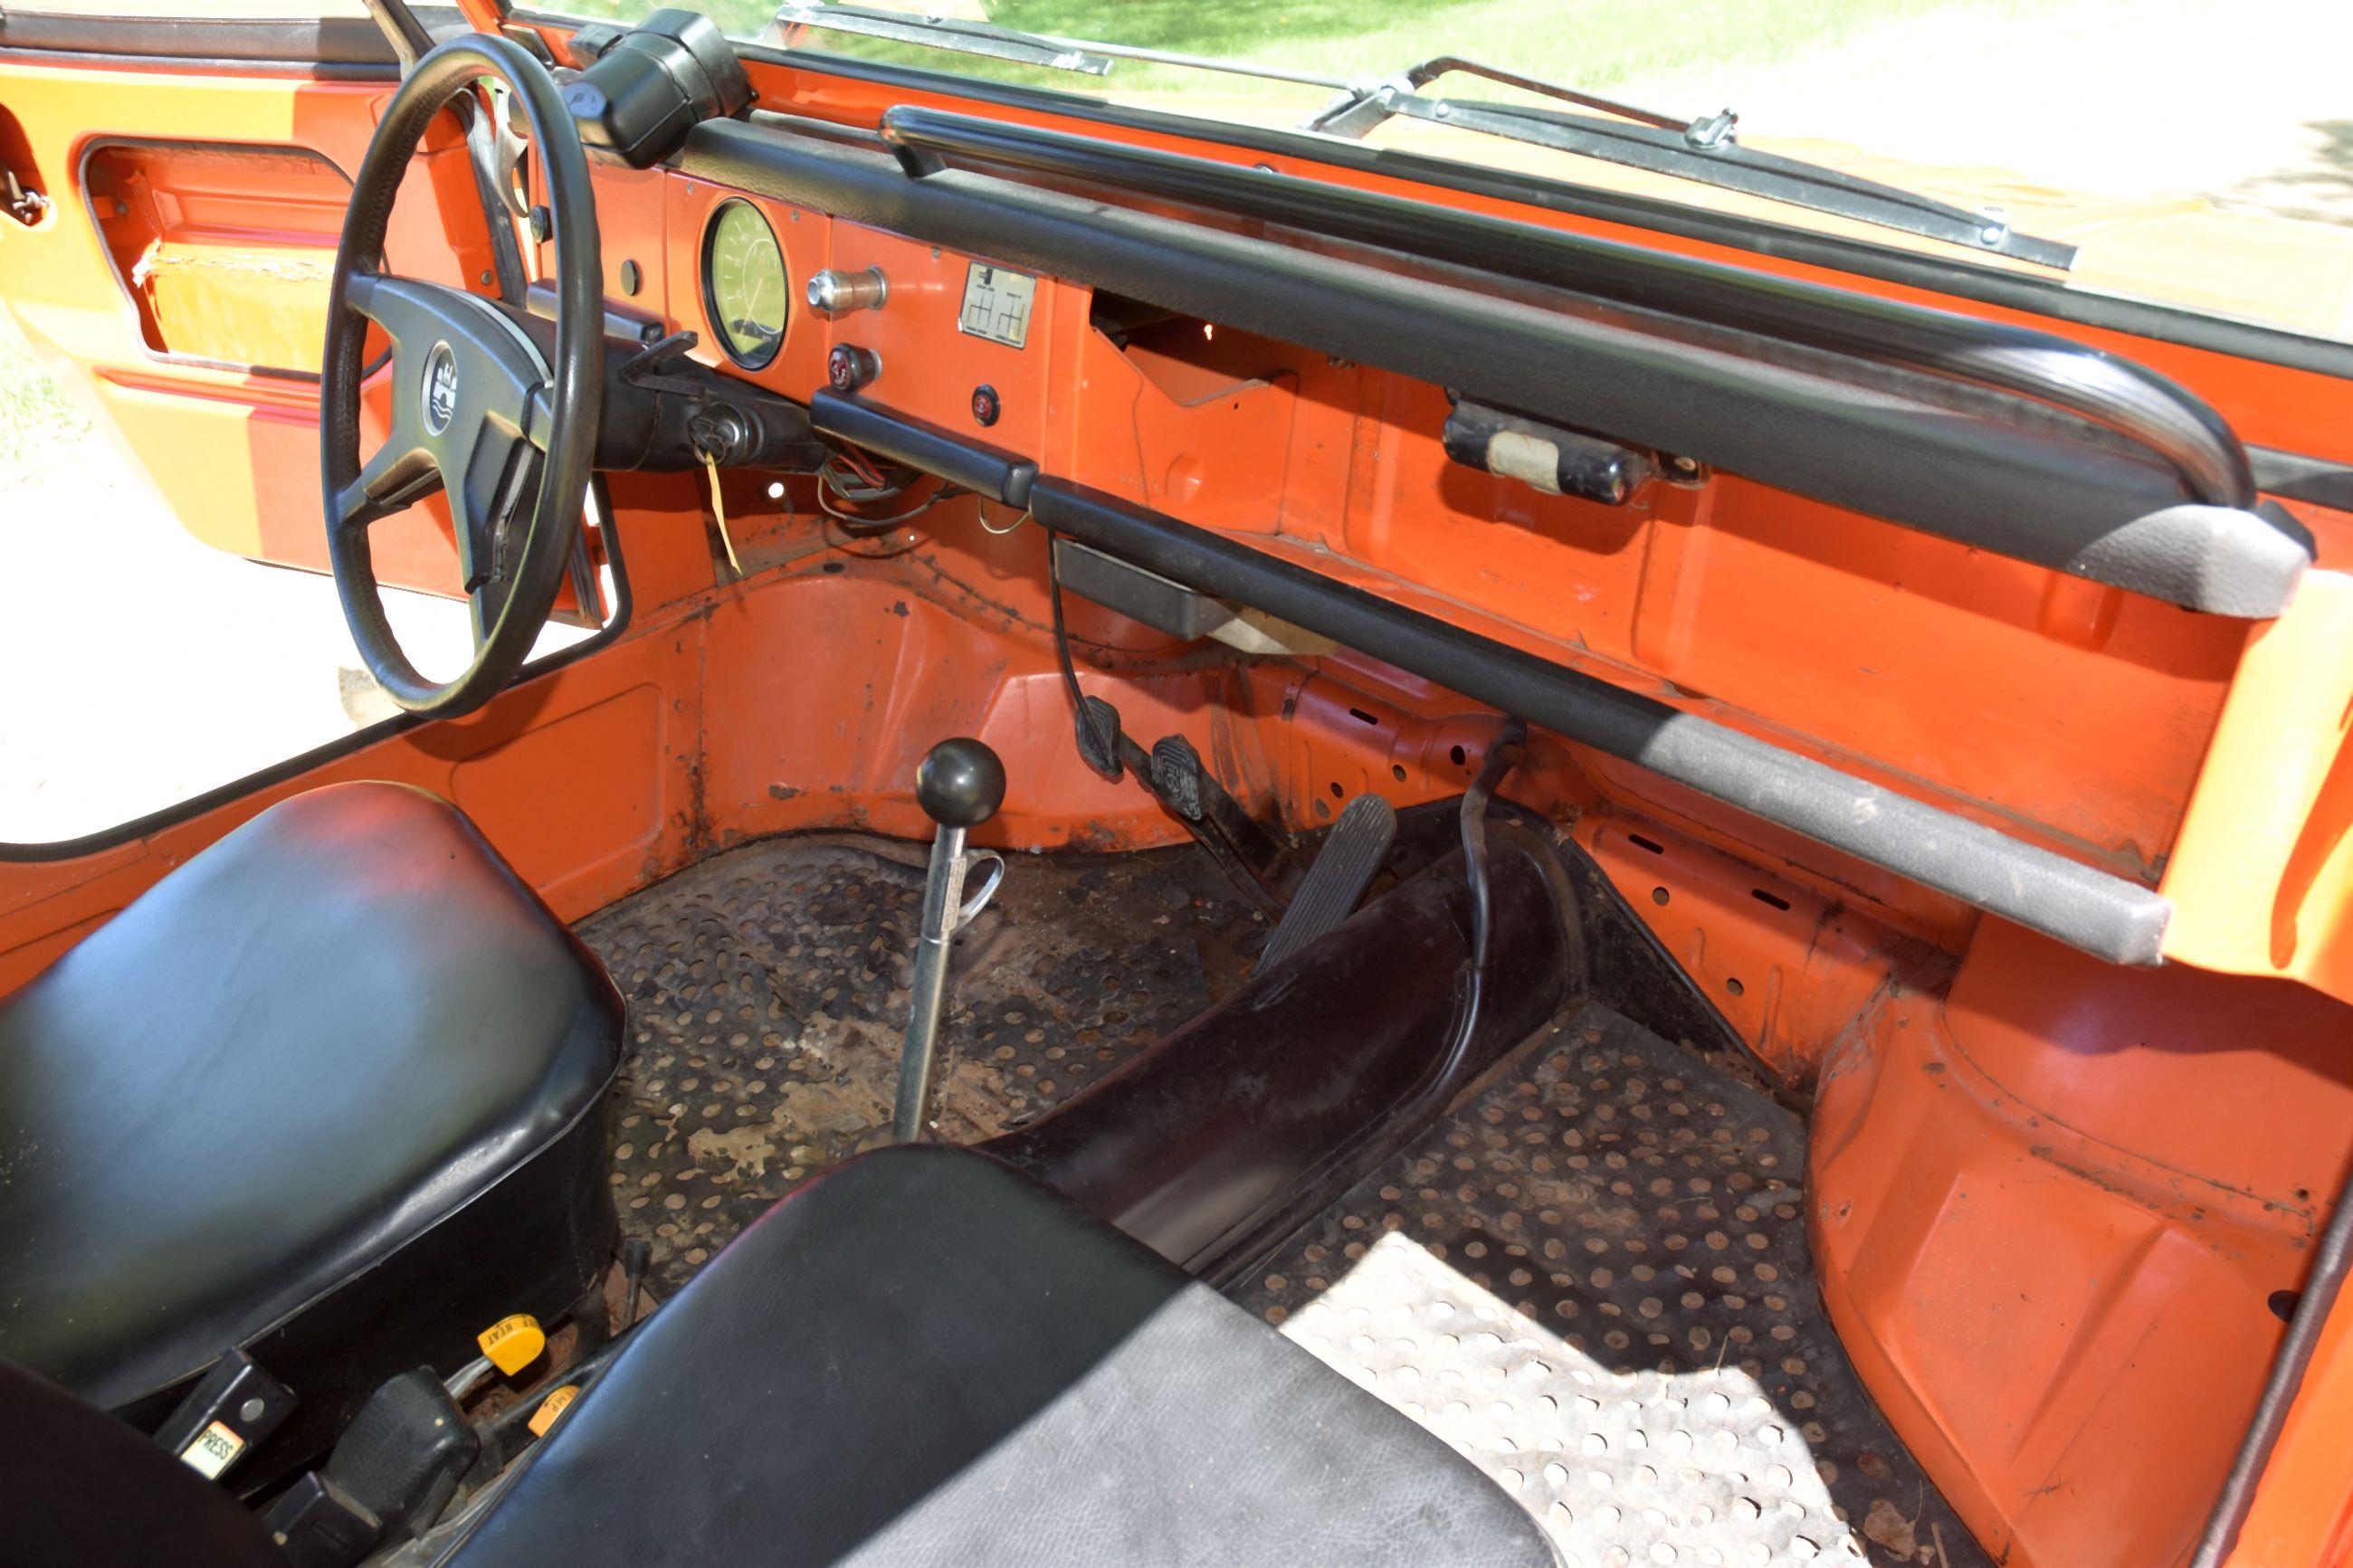 1974 VW “Thing” Convertible, Hurst Shifter, 59,572 Miles, 4 Door, Motor Is Free, Good Body, Has Titl